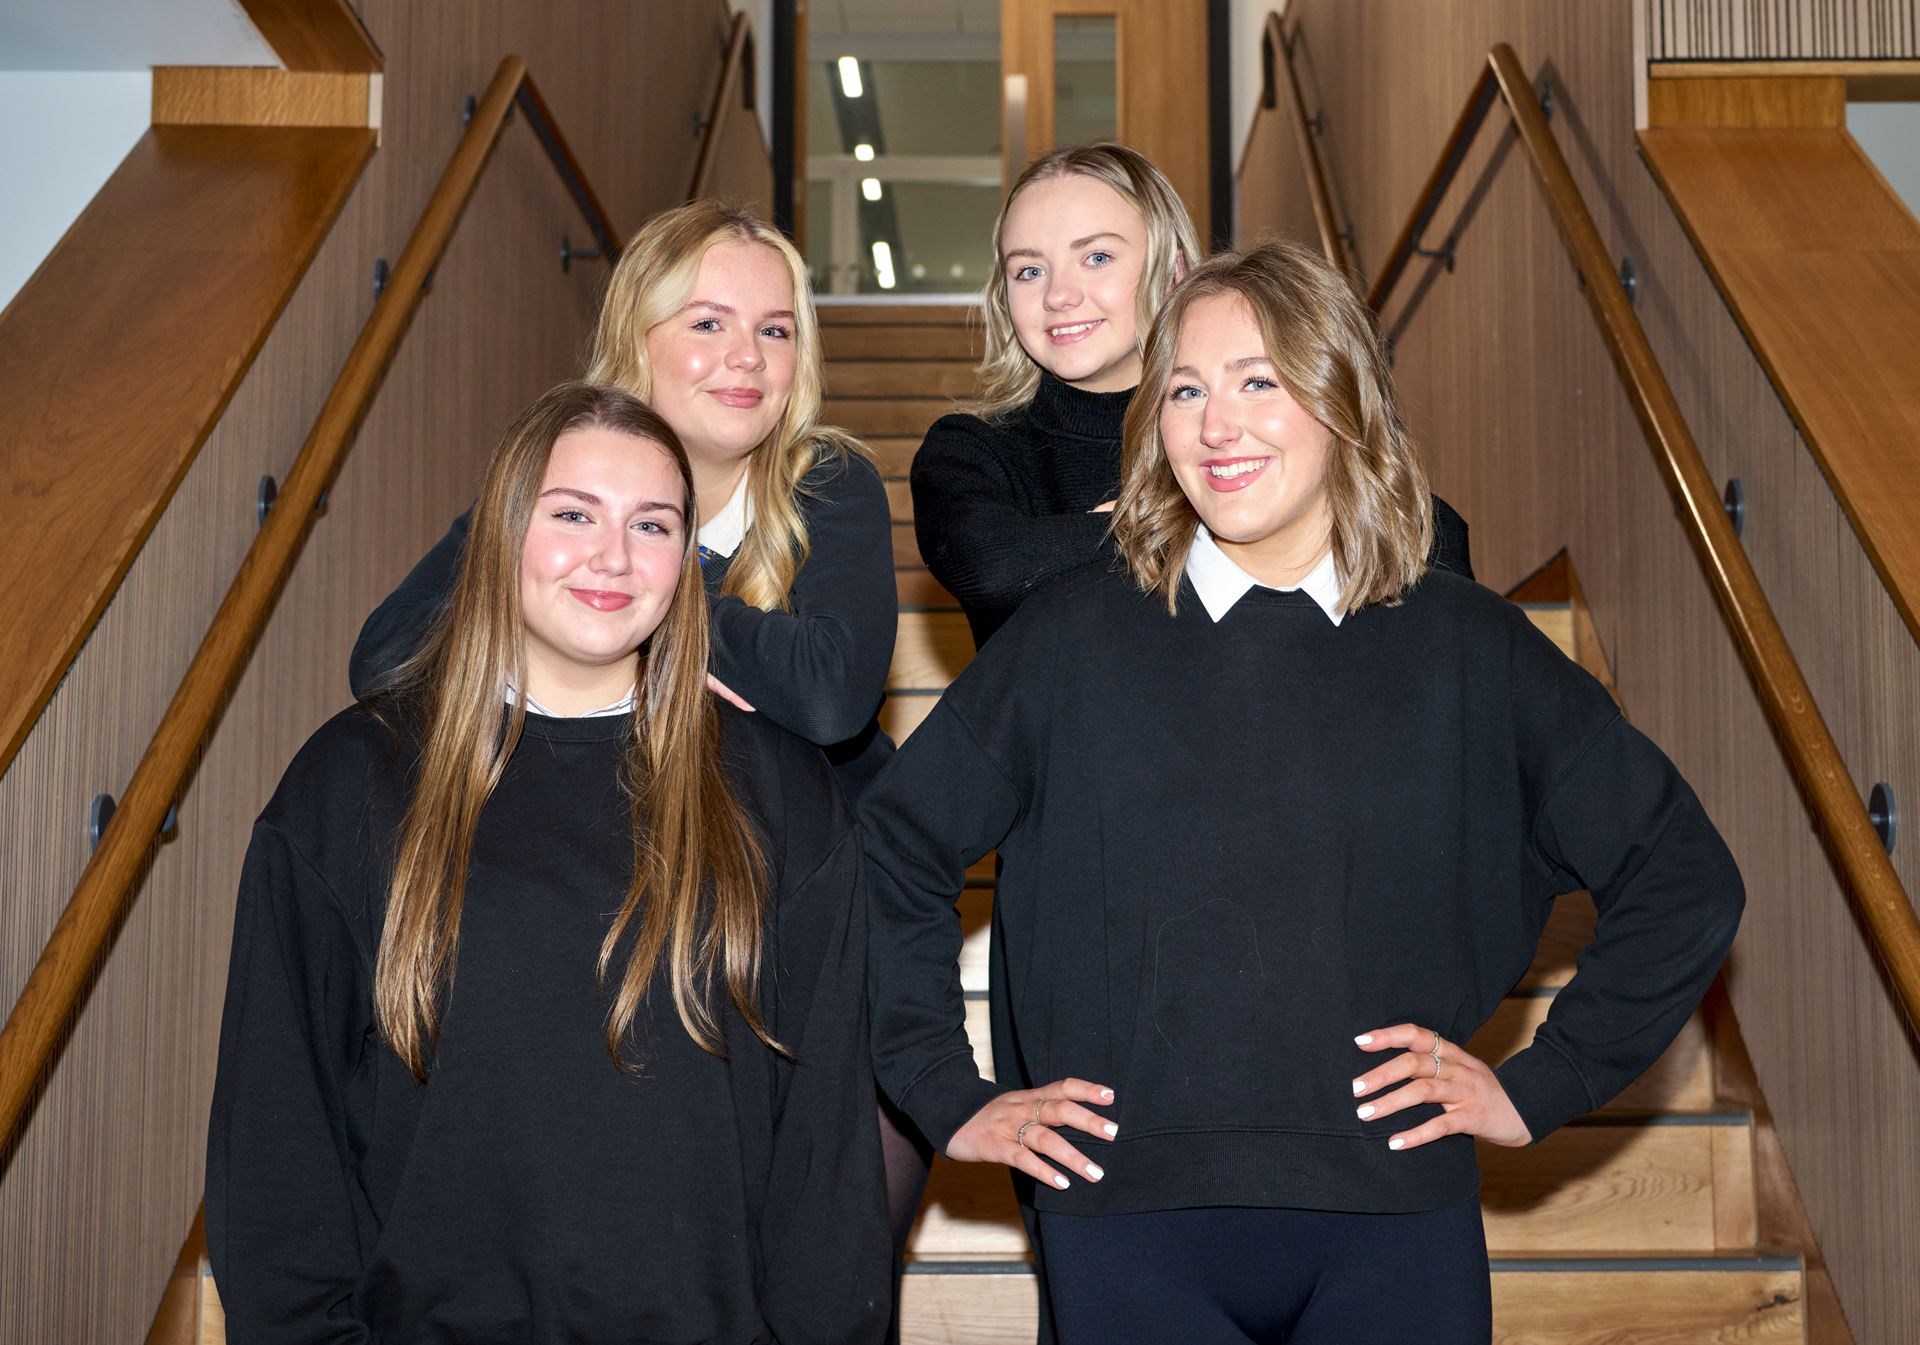 Lossiemouth High pupils Abby, Esme, Amy, and Keira reach the final of a national investing competition...Picture: Gary Murison